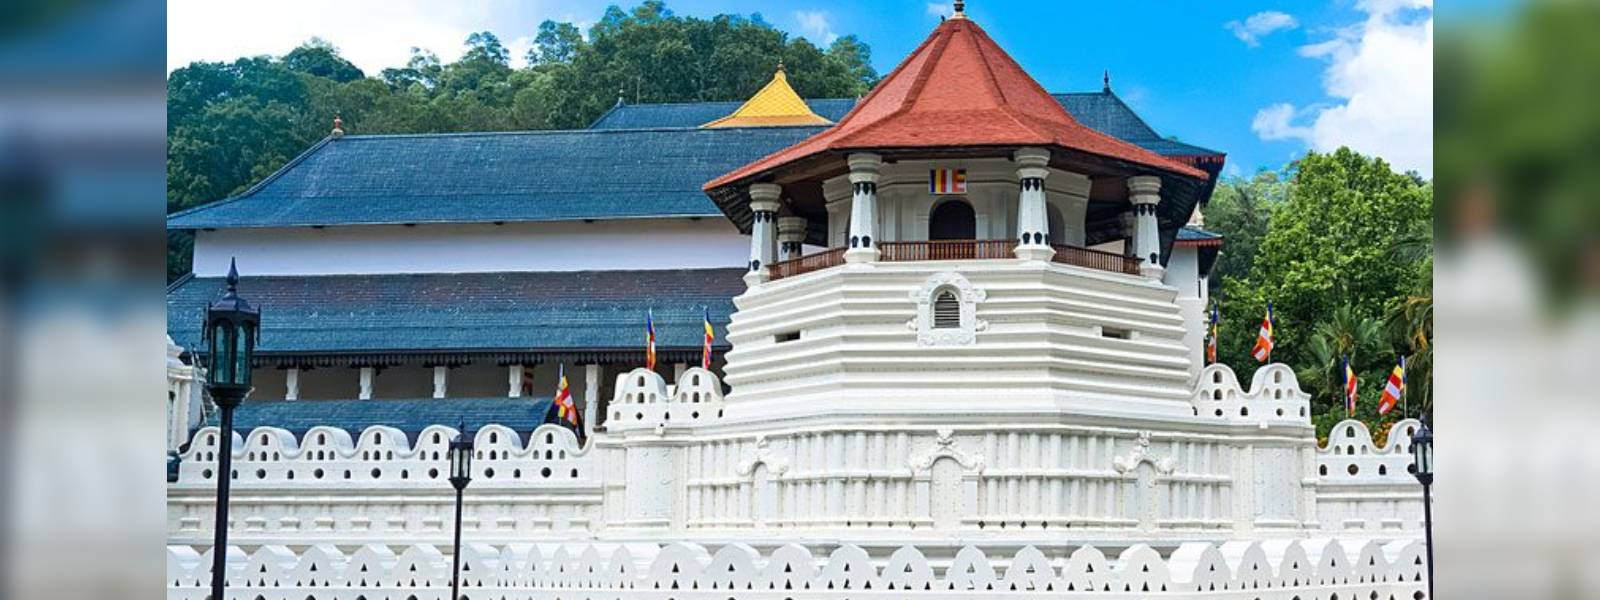 Restrictions imposed on entry to Dalada Maligawa temple